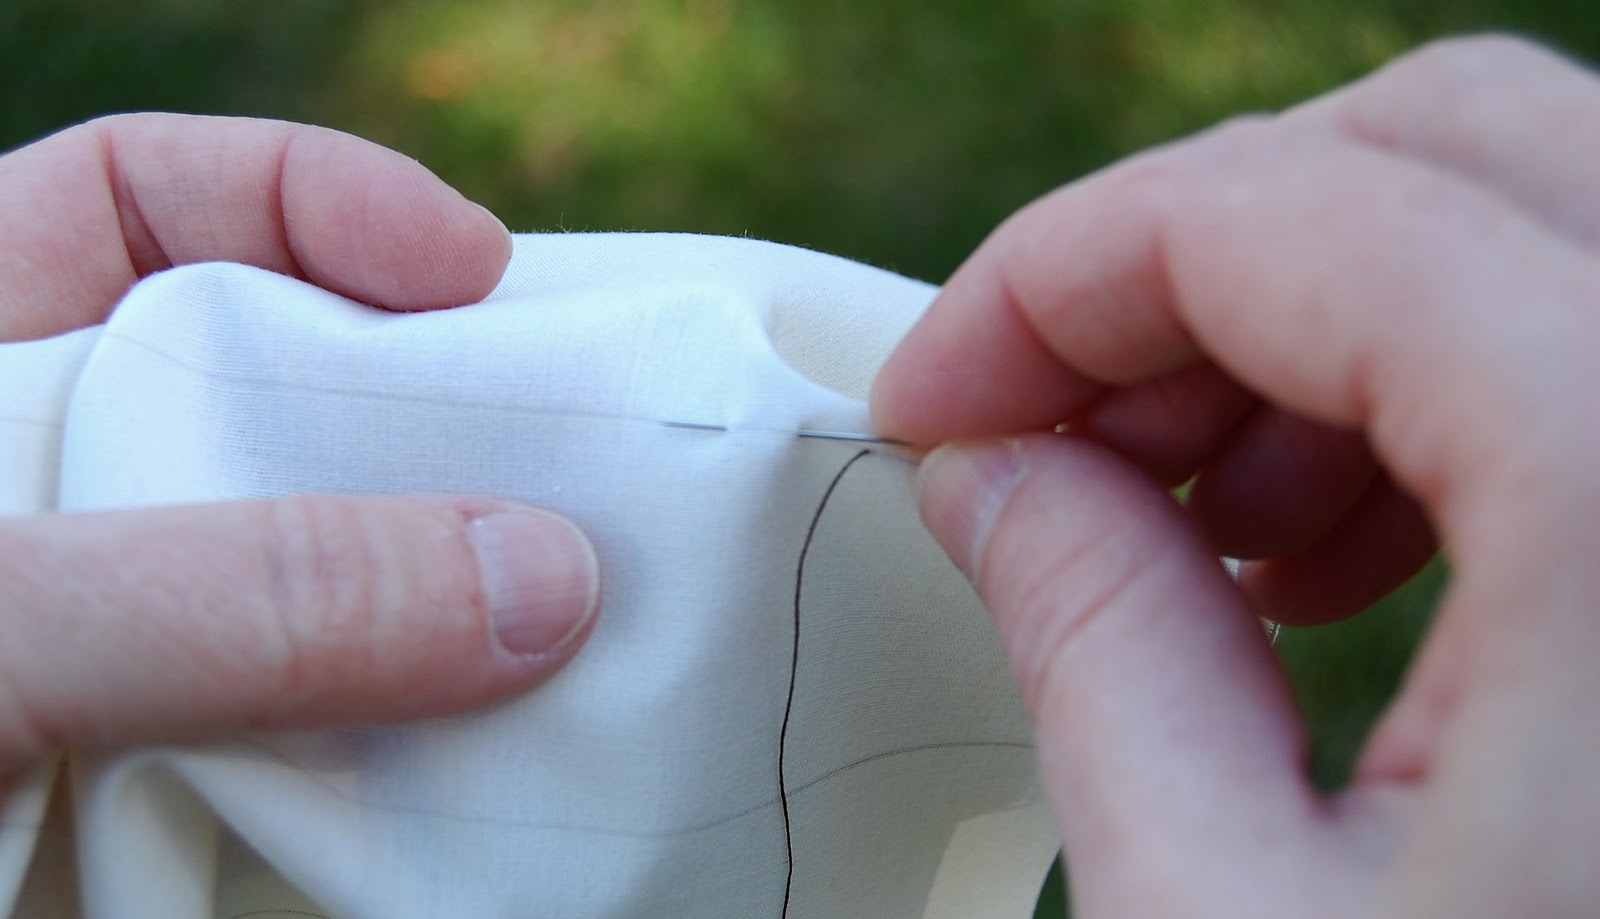 How to Hand Sew Basic Stitches